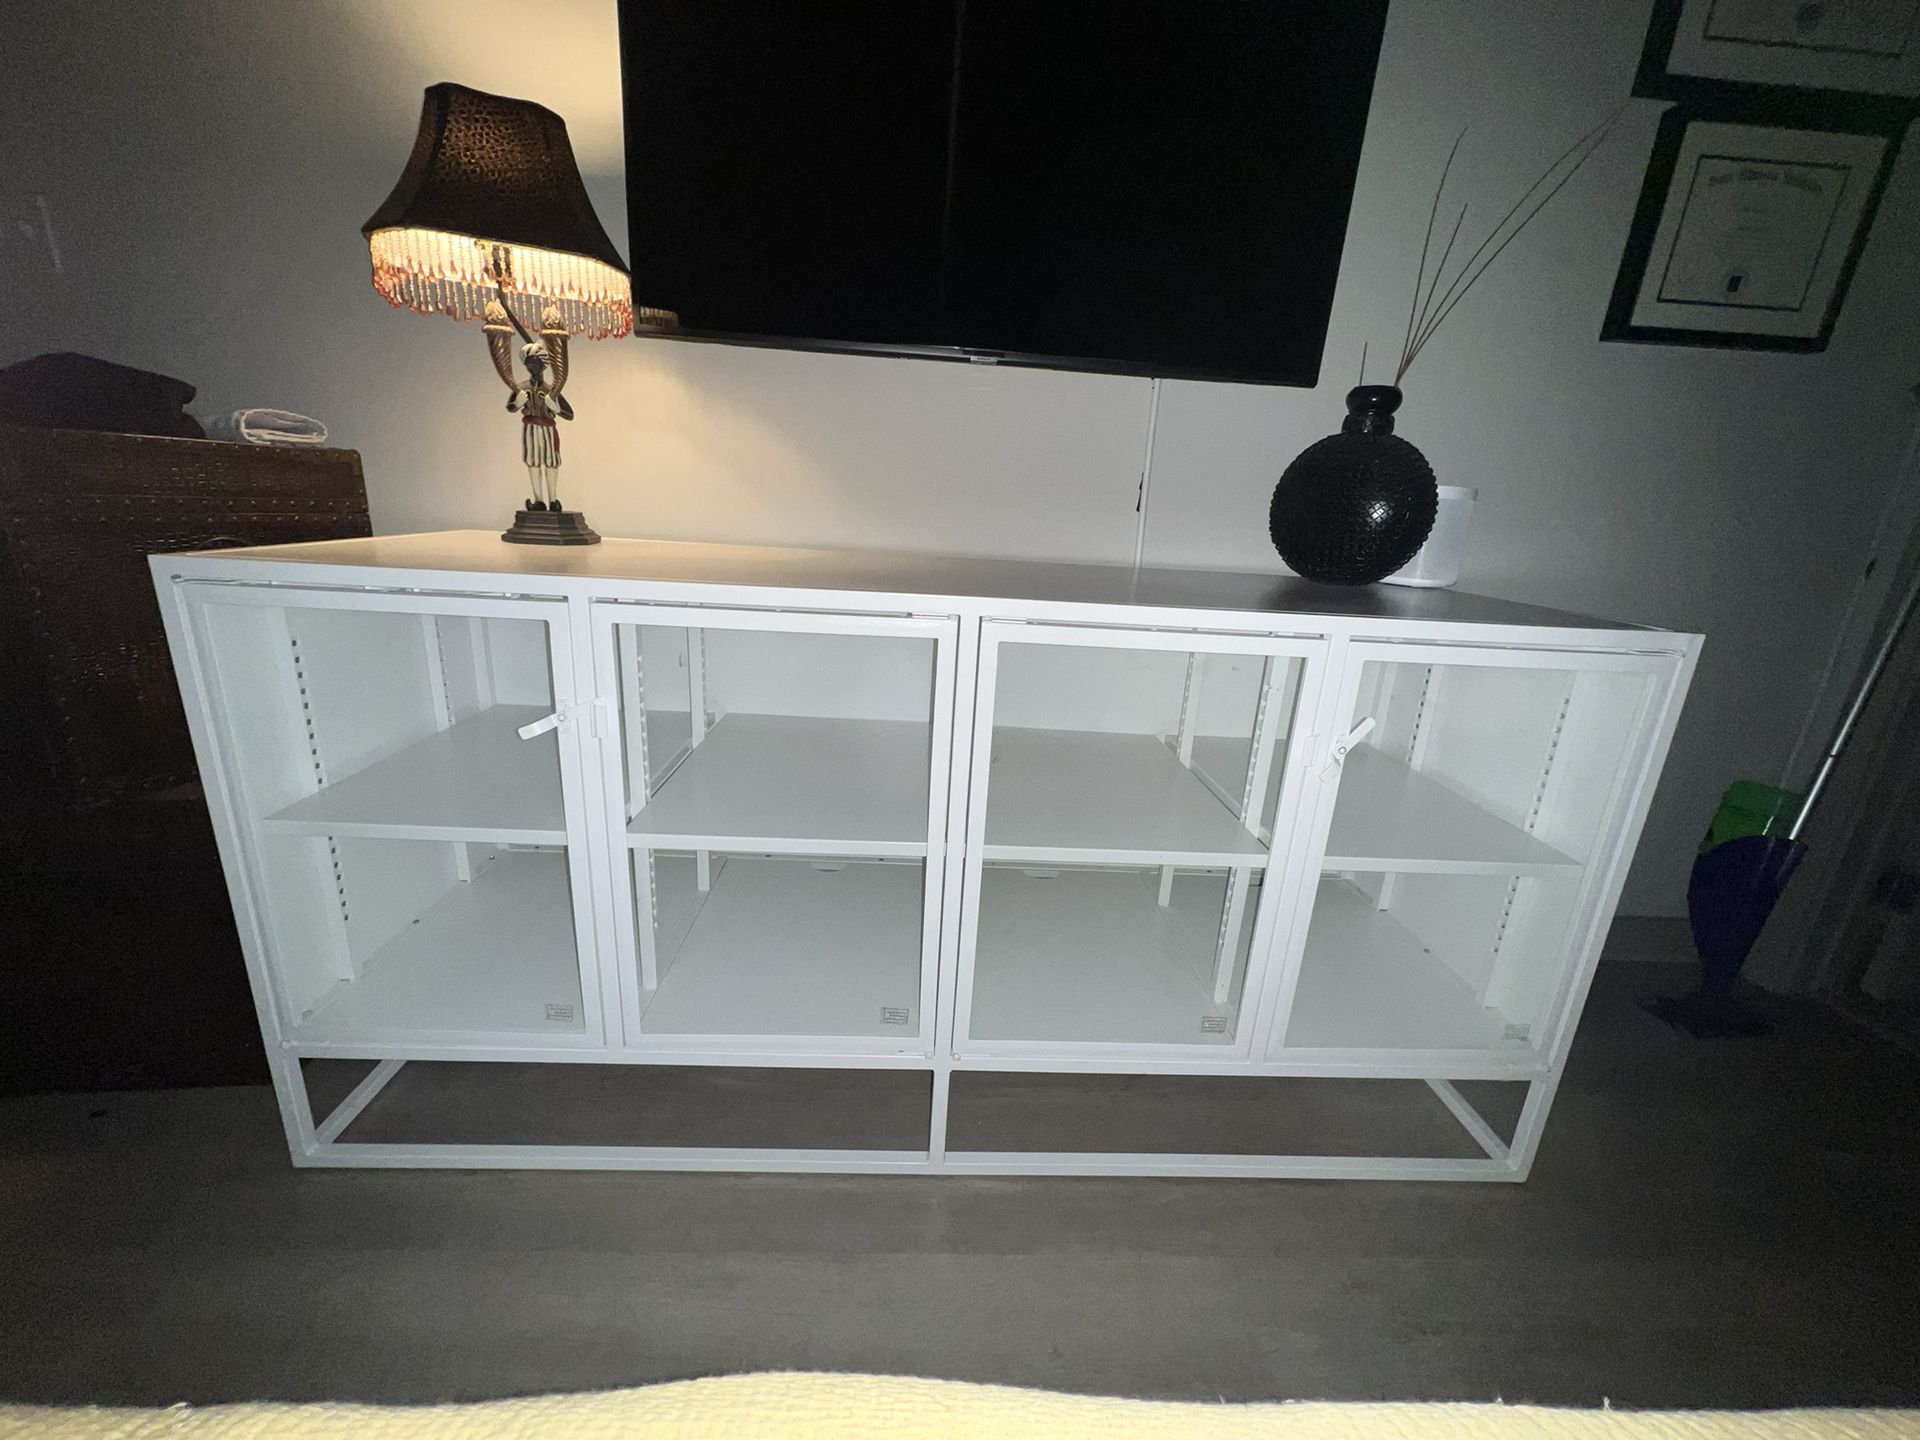 Crate & Barrel - White sideboard/media console